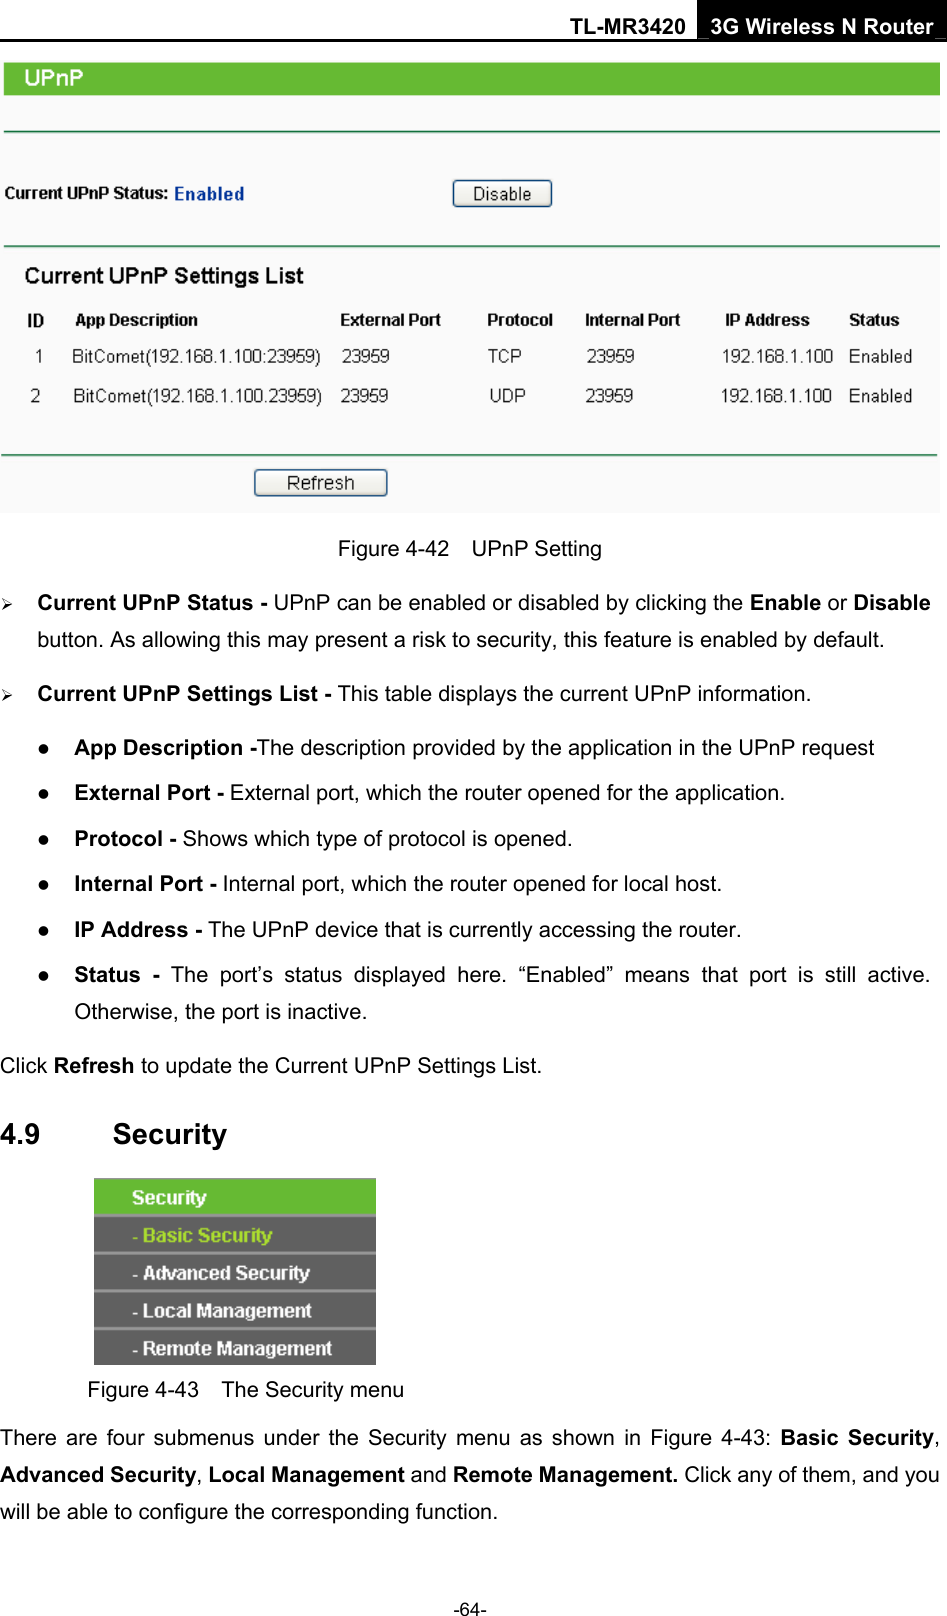 TL-MR3420 3G Wireless N Router -64-  Figure 4-42  UPnP Setting ¾ Current UPnP Status - UPnP can be enabled or disabled by clicking the Enable or Disable button. As allowing this may present a risk to security, this feature is enabled by default.   ¾ Current UPnP Settings List - This table displays the current UPnP information. z App Description -The description provided by the application in the UPnP request z External Port - External port, which the router opened for the application. z Protocol - Shows which type of protocol is opened. z Internal Port - Internal port, which the router opened for local host. z IP Address - The UPnP device that is currently accessing the router. z Status - The port’s status displayed here. “Enabled” means that port is still active. Otherwise, the port is inactive. Click Refresh to update the Current UPnP Settings List.   4.9  Security  Figure 4-43    The Security menu There are four submenus under the Security menu as shown in Figure 4-43: Basic Security, Advanced Security, Local Management and Remote Management. Click any of them, and you will be able to configure the corresponding function. 